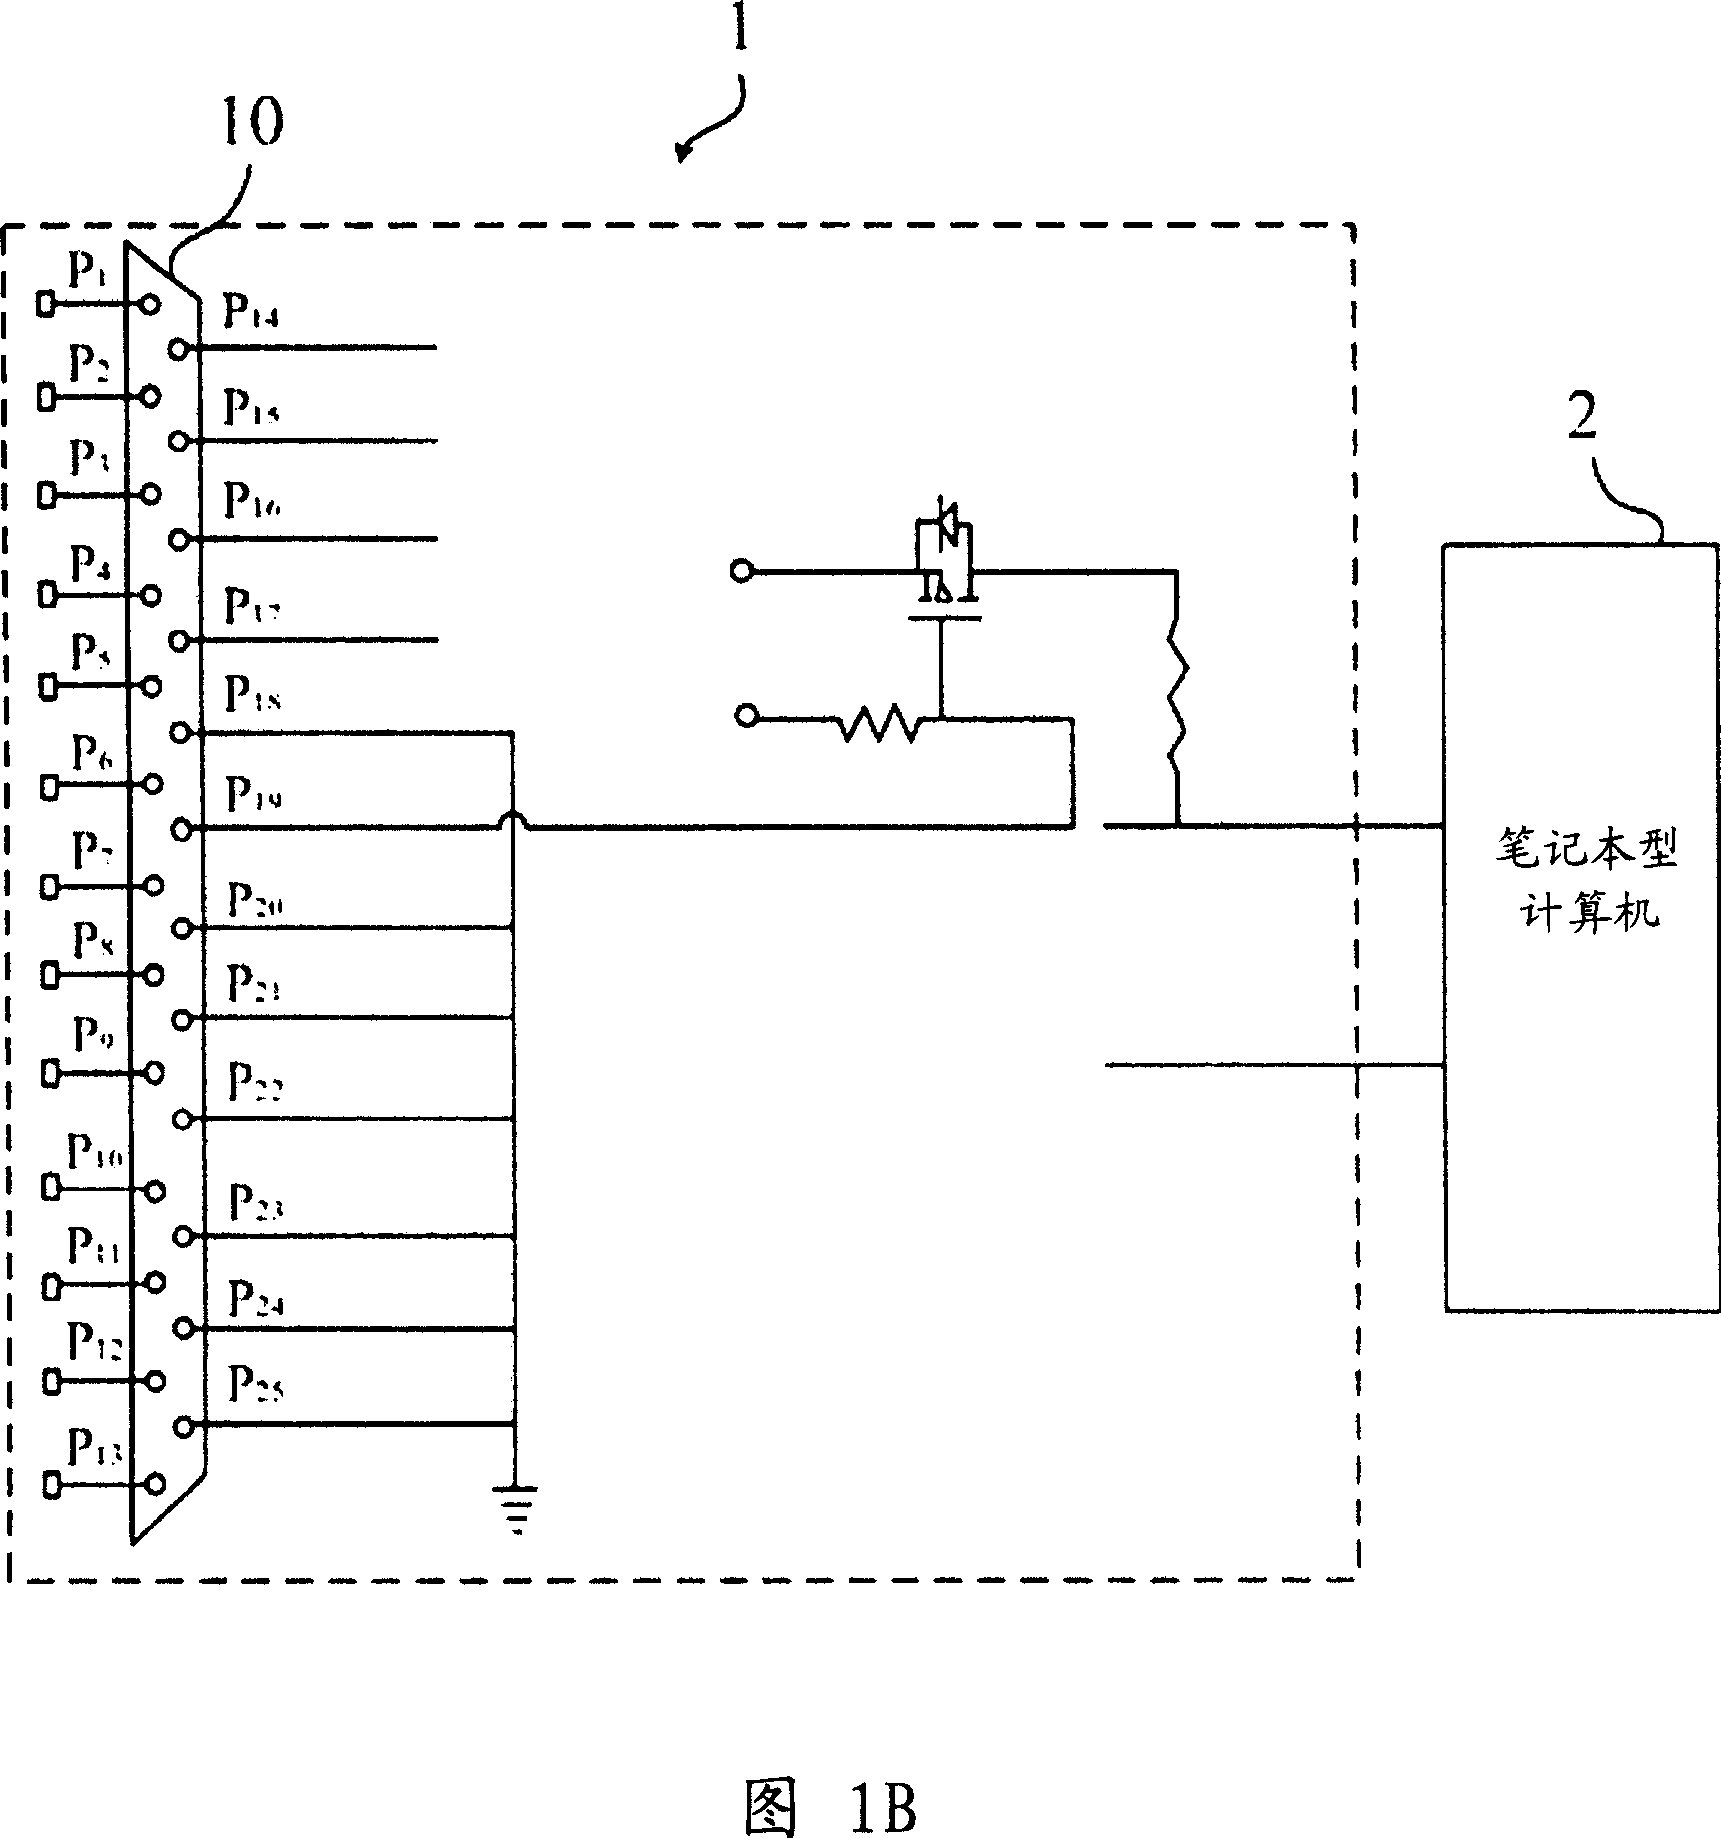 Peripheral device detecting system and its method